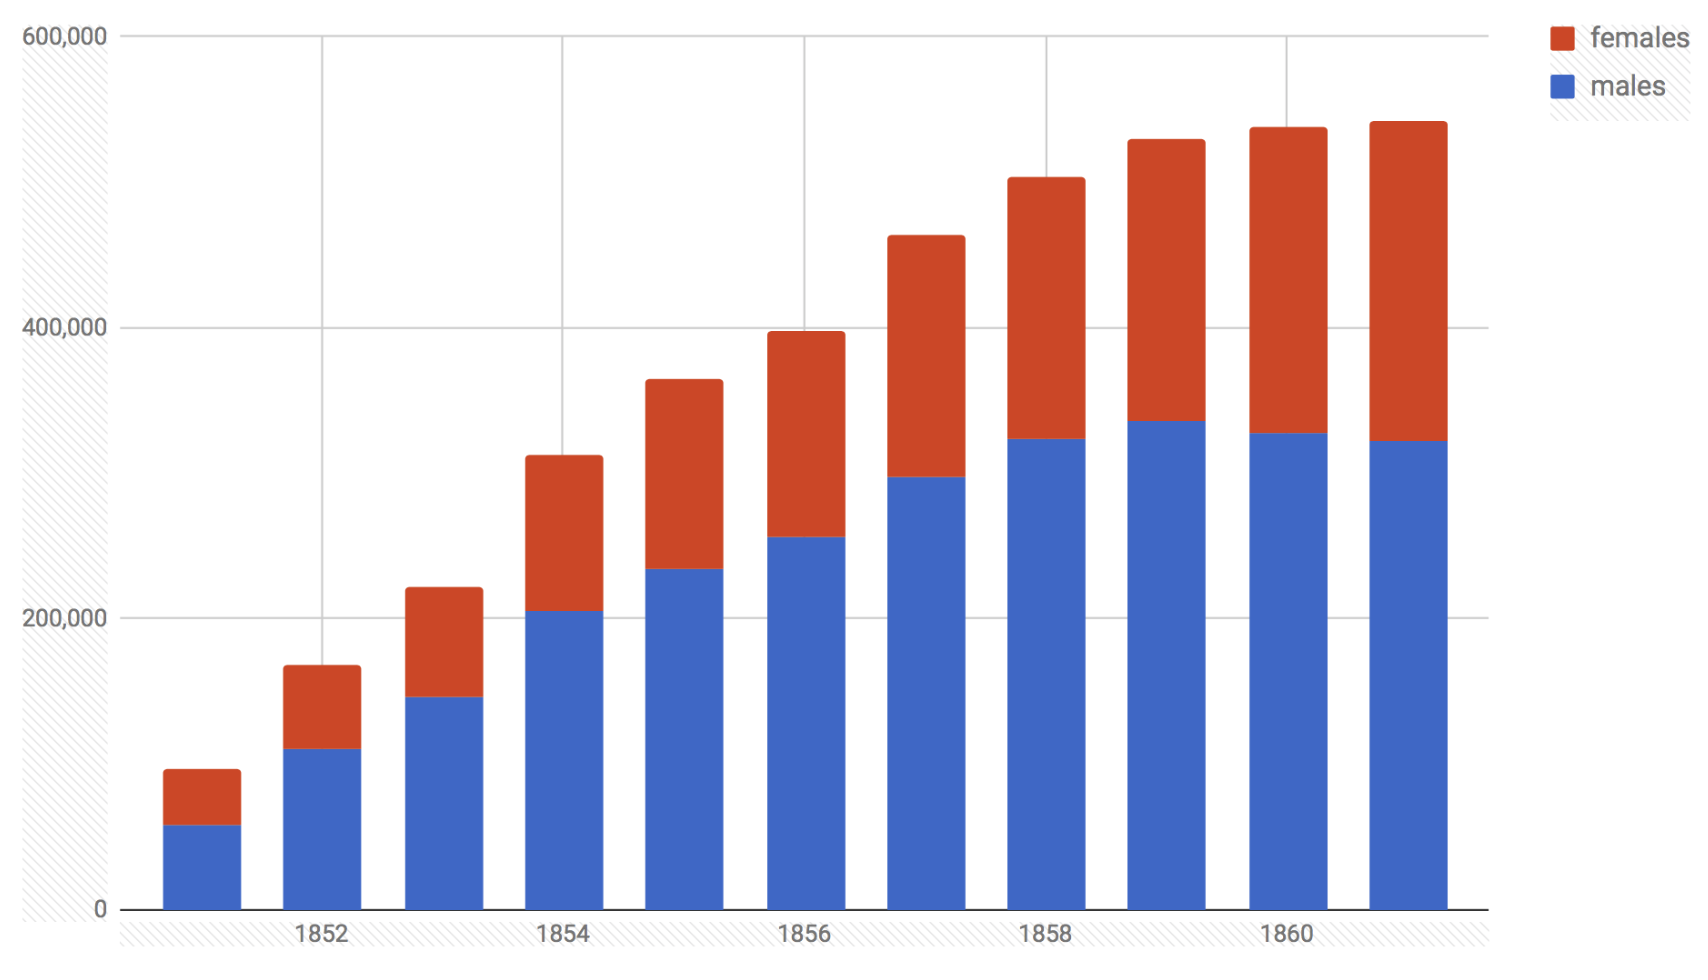 Population of Victoria in the 1850s